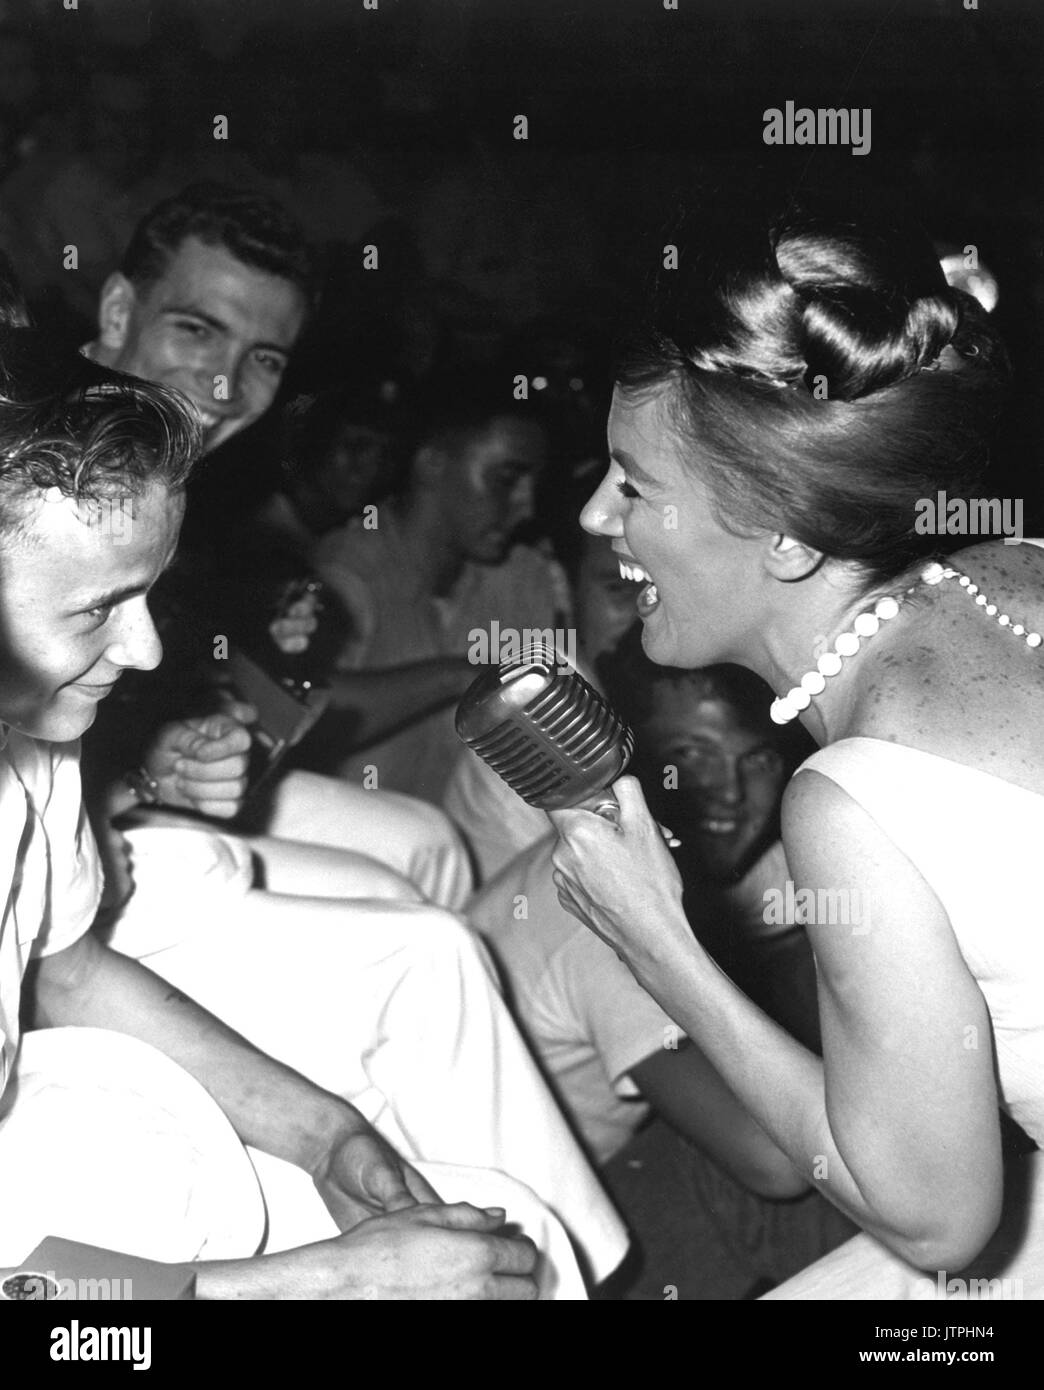 Twenty-one year old James R. Gould is the envy of 3,000 crewmemberrs as television actress Kathleen Nolan singles him out for a song.  The young sailor and Bon Homme Richard both celebrated their 'coming of age' on November 26, 1965. (USIA) NARA FILE #:  306-MVP-8-6 WAR & CONFLICT BOOK #:  392 Stock Photo